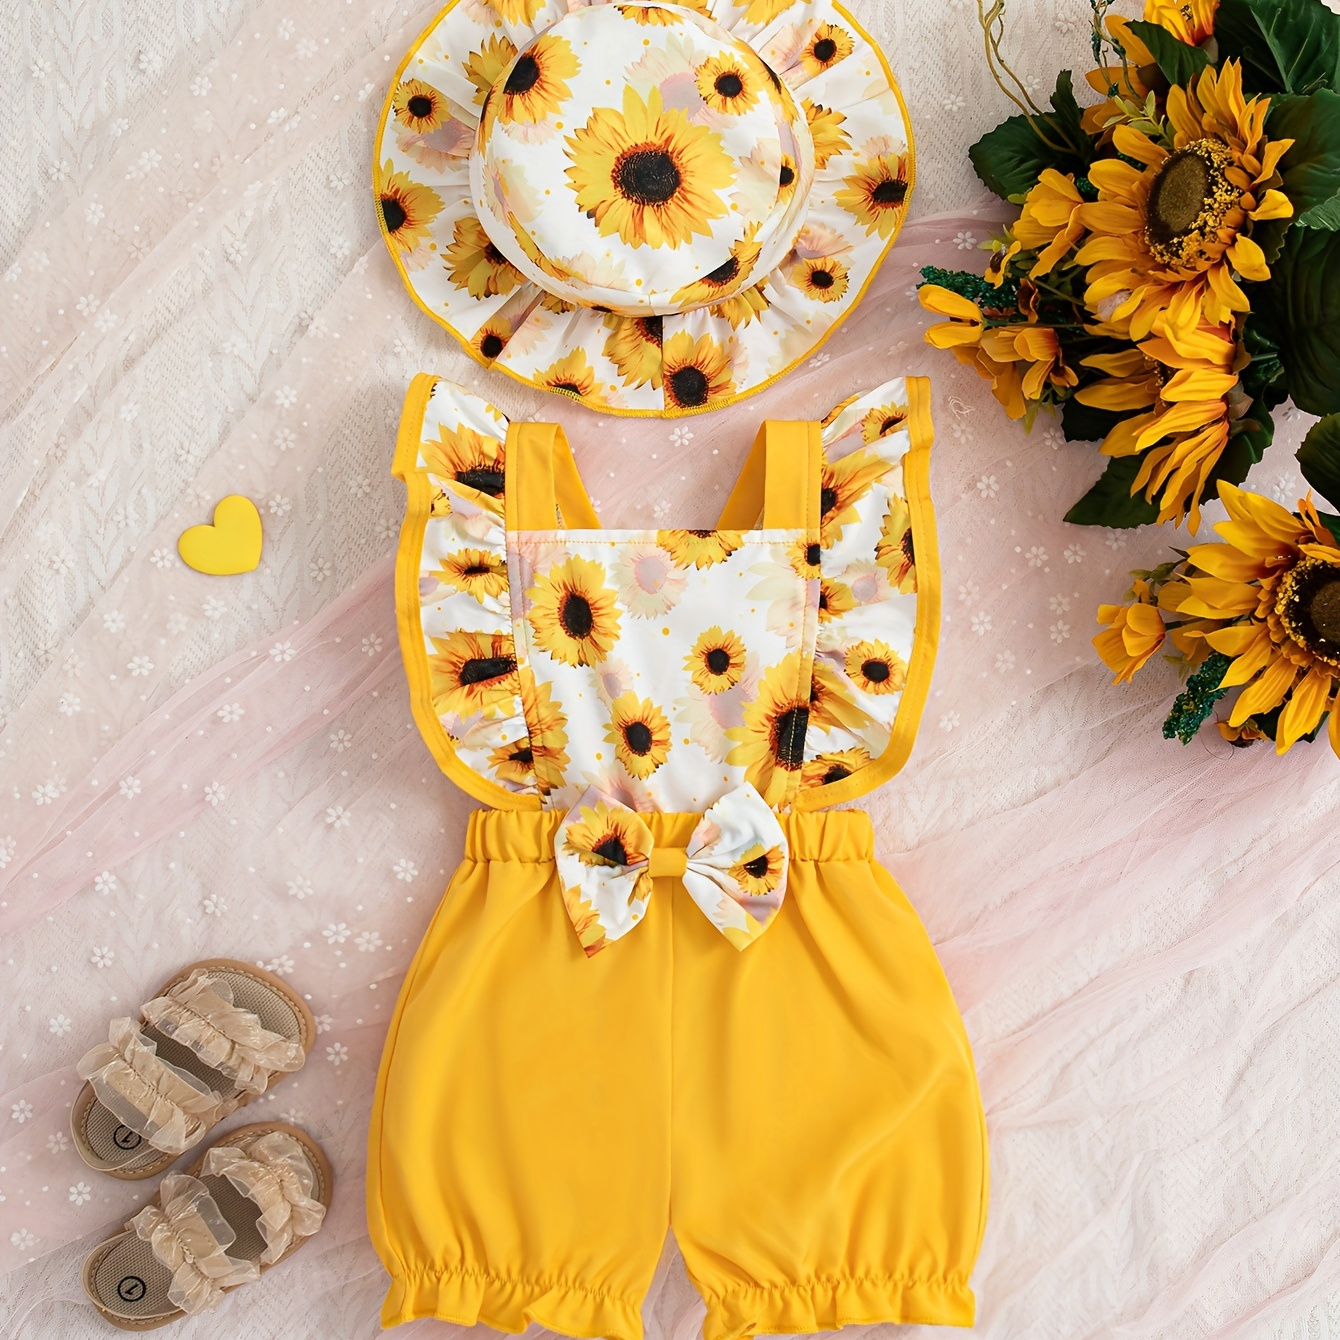 

Baby's Cartoon Sunflower Pattern Faux Two-piece Bodysuit & Hat, Casual Bowknot Cap Sleeve Romper, Toddler & Infant Girl's Onesie For Summer, As Gift